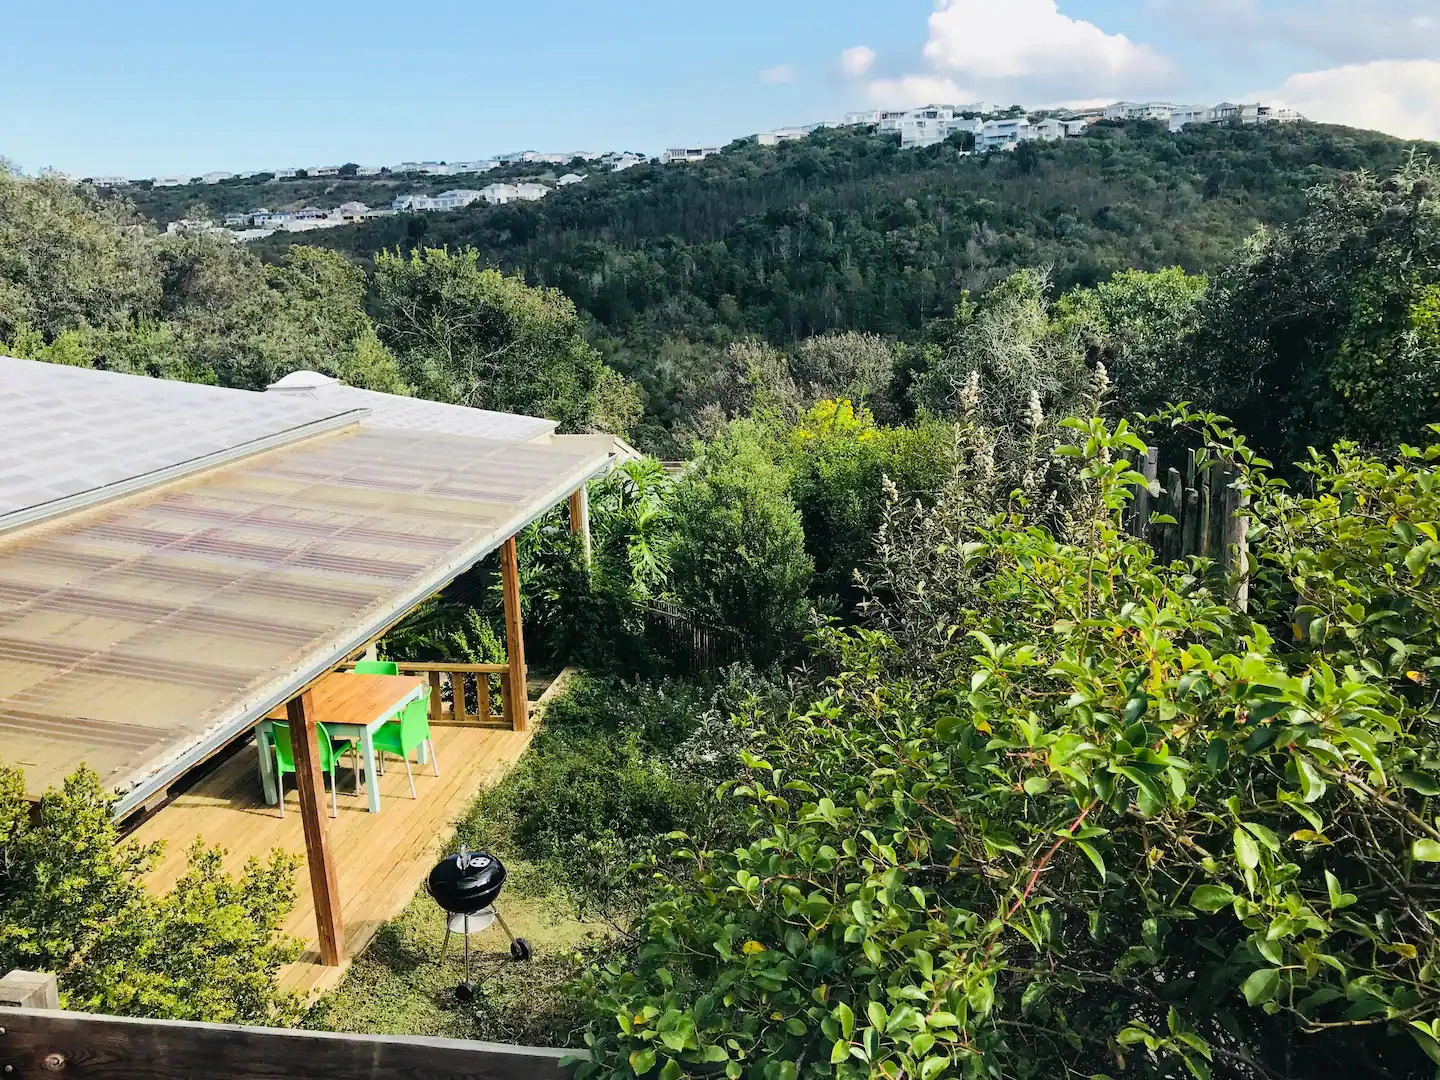 Treebia Self-catering apartments, a suburban forest hideaway set on the slopes overlooking the Klein Piesang River valley greenbelt area with abundant bird life and regular sighting of the famous Knysna Loerie and local Vervet monkeys.